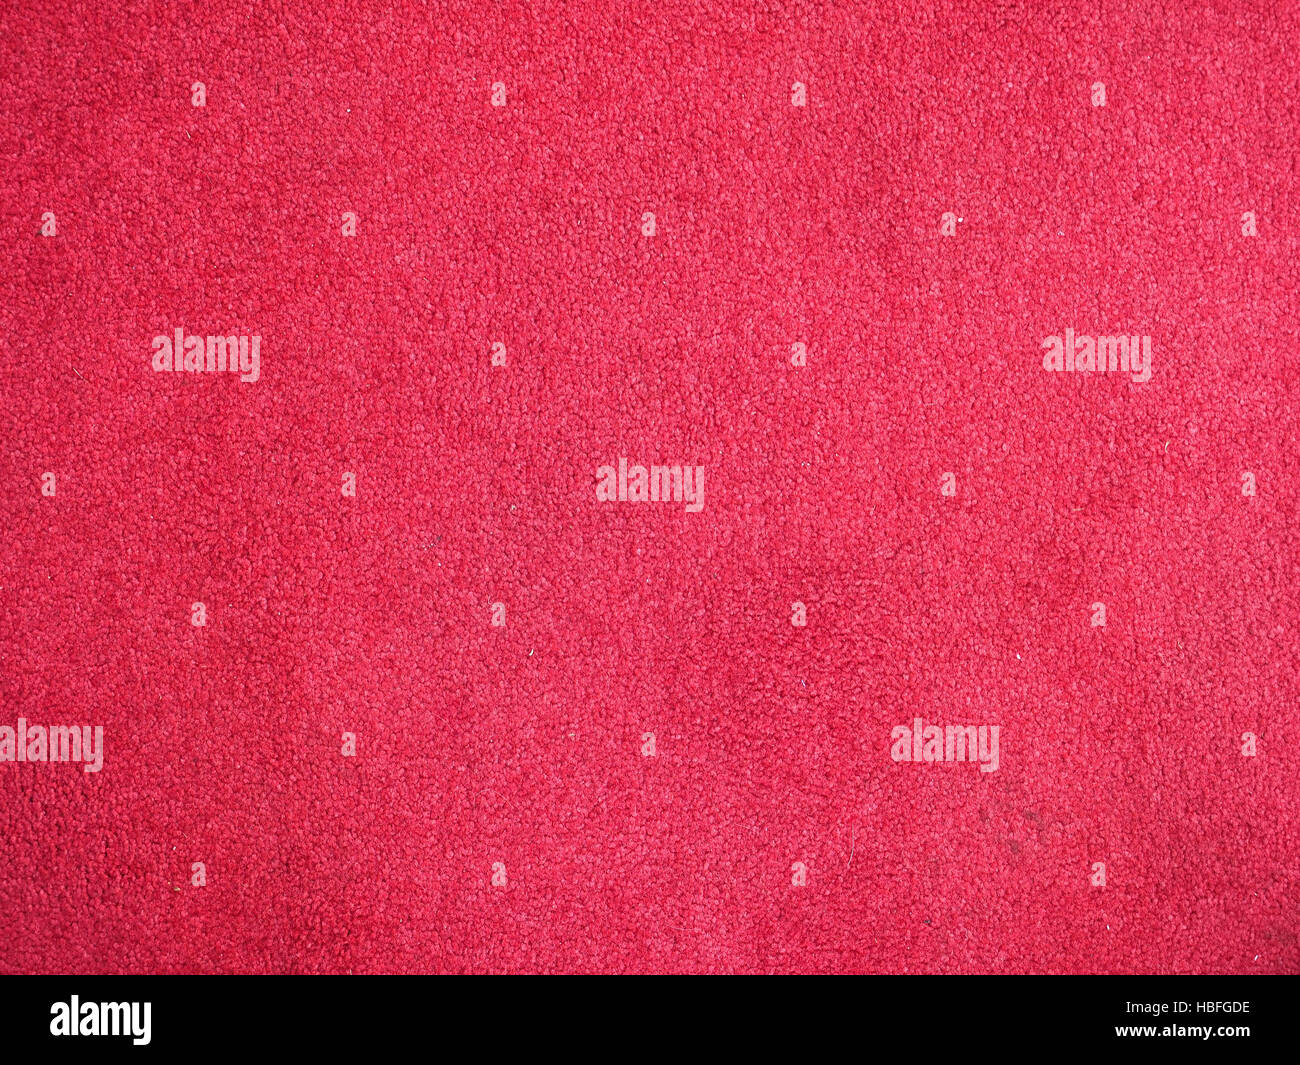 Red carpet background Stock Photo